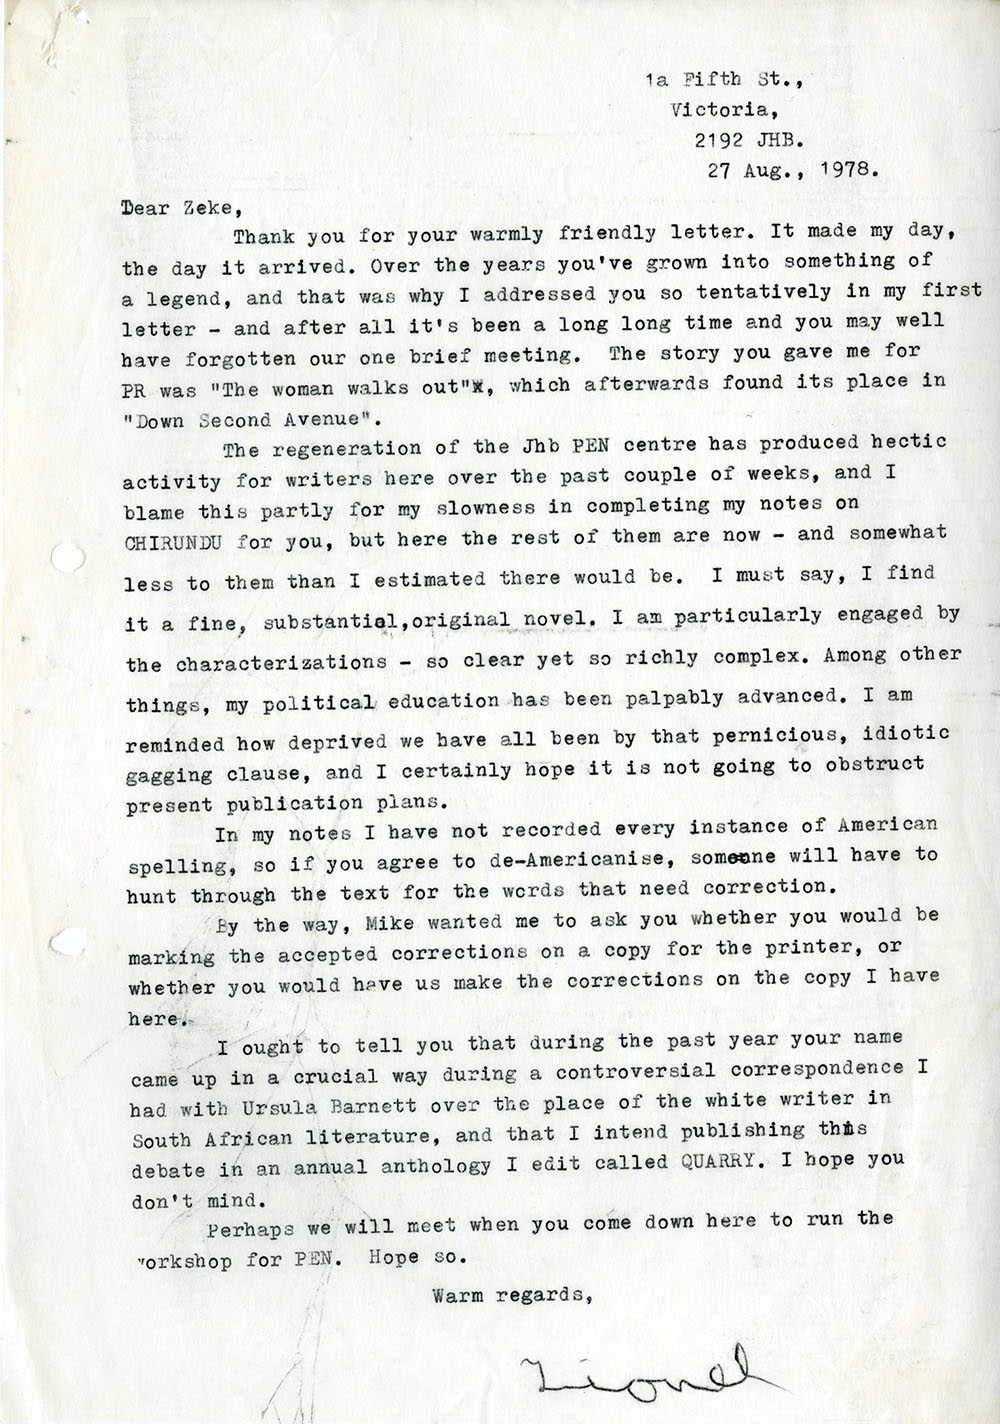 Correspondence between Mphahlele and Lionel Abrahams, who edited <em>Chirundu</em>. Abrahams was a respected South African writer.